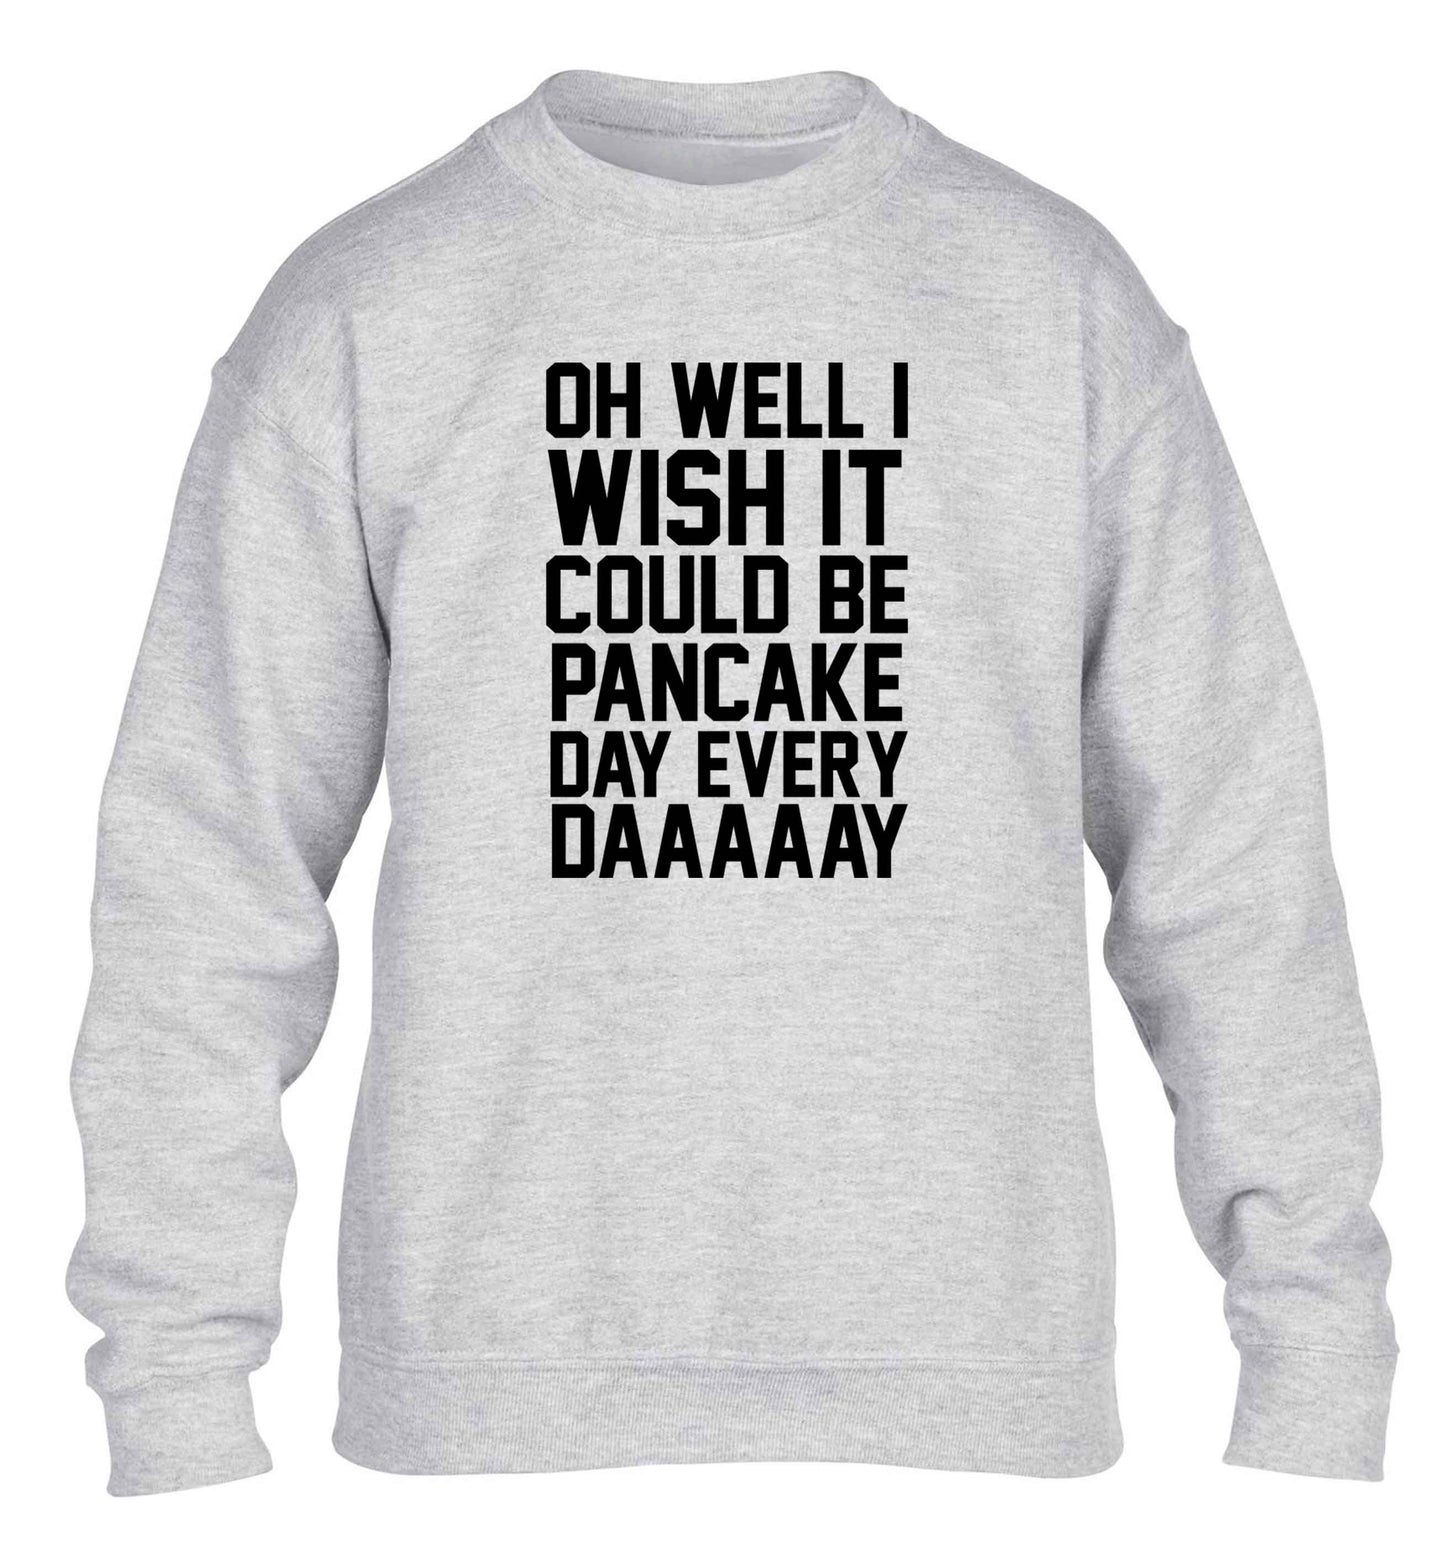 Oh well I wish it could be pancake day every day children's grey sweater 12-13 Years